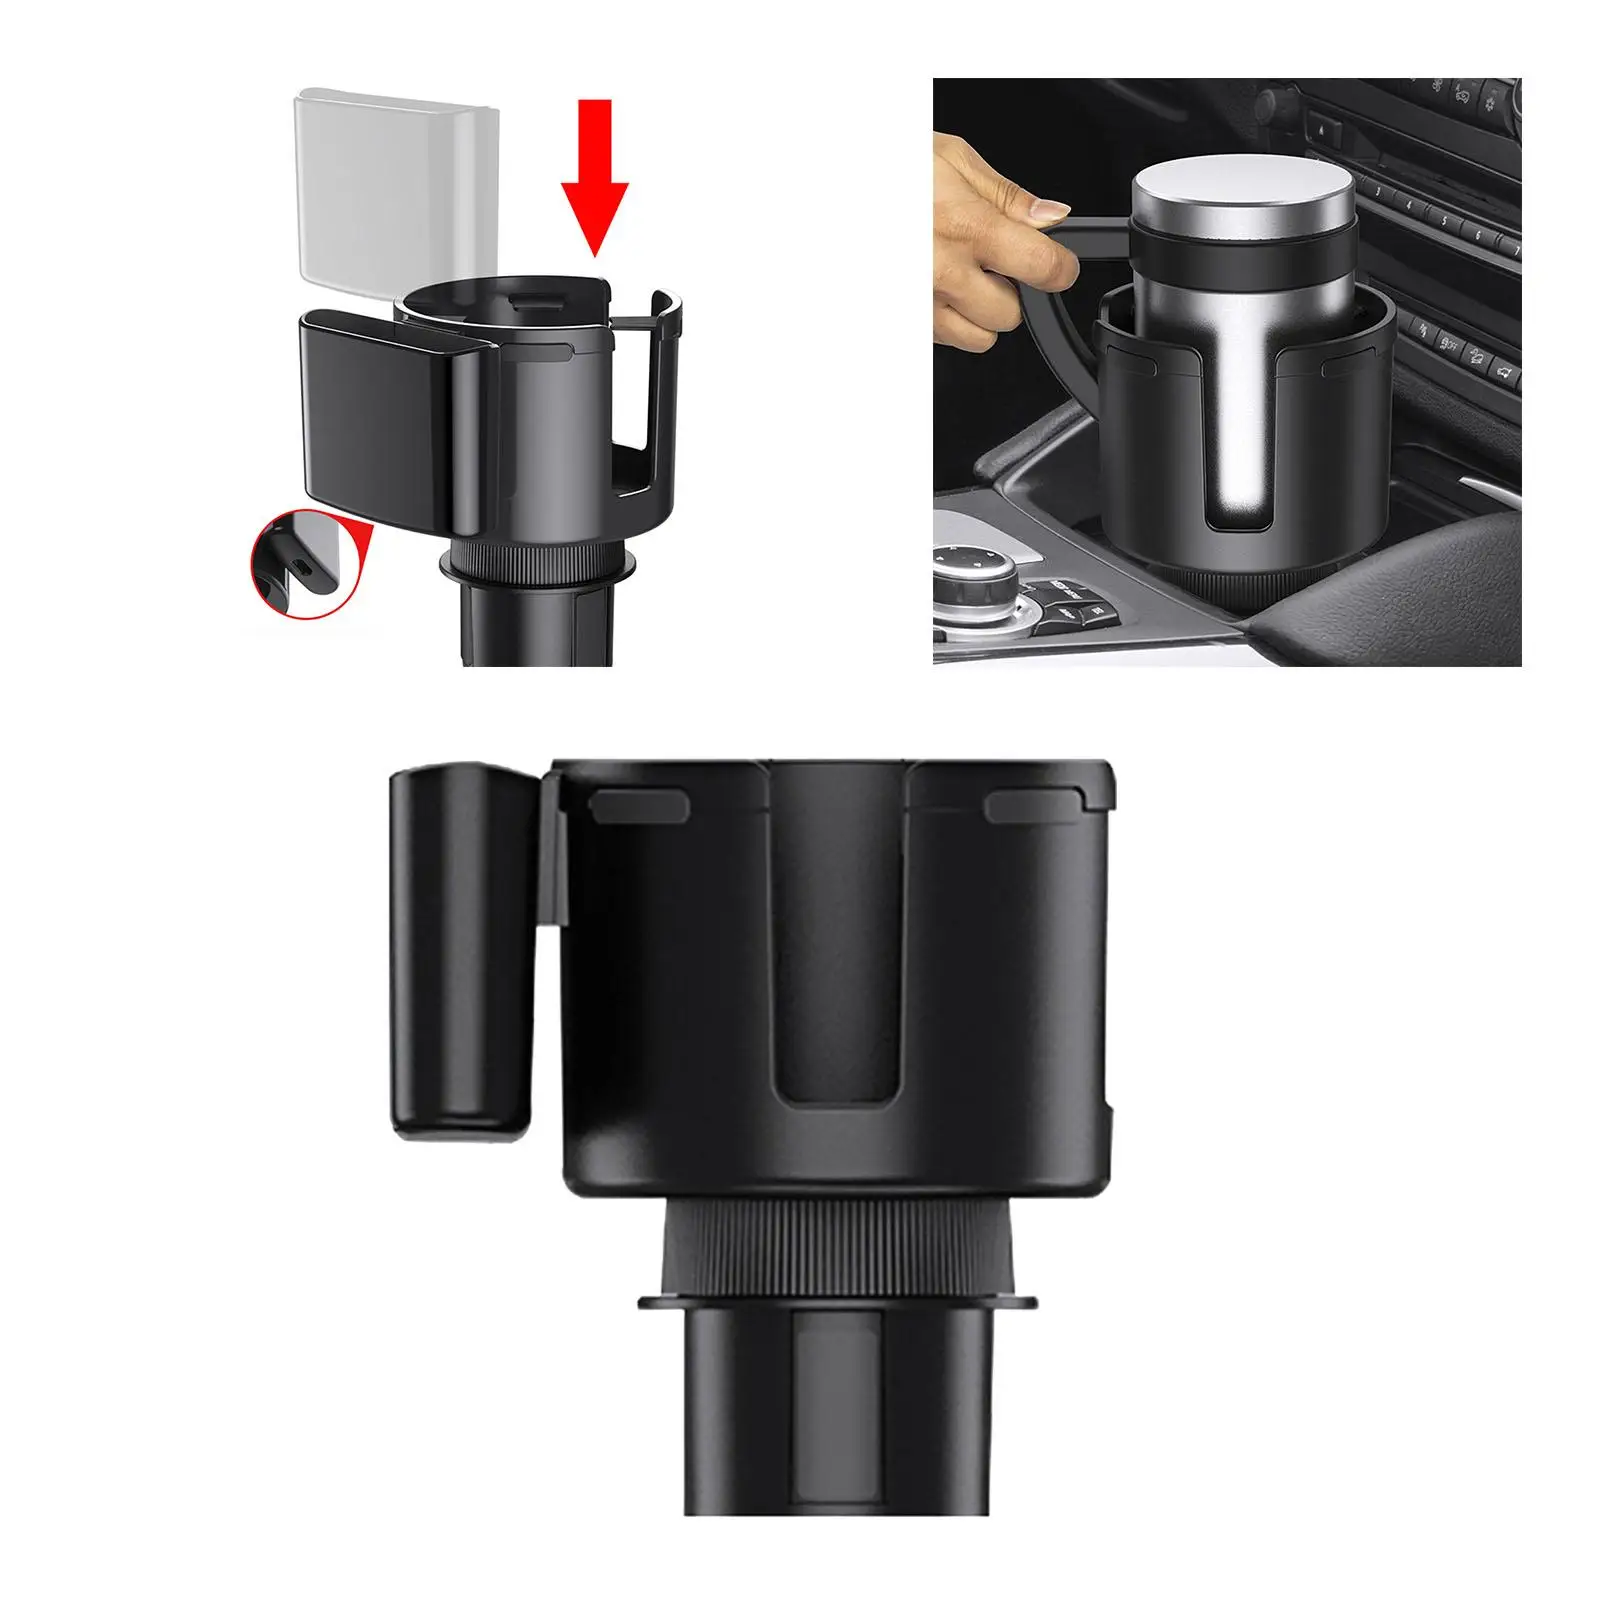 Car Cup Holder Expander Adapter with Phone Mount Stand for Mugs Cup Car Phone